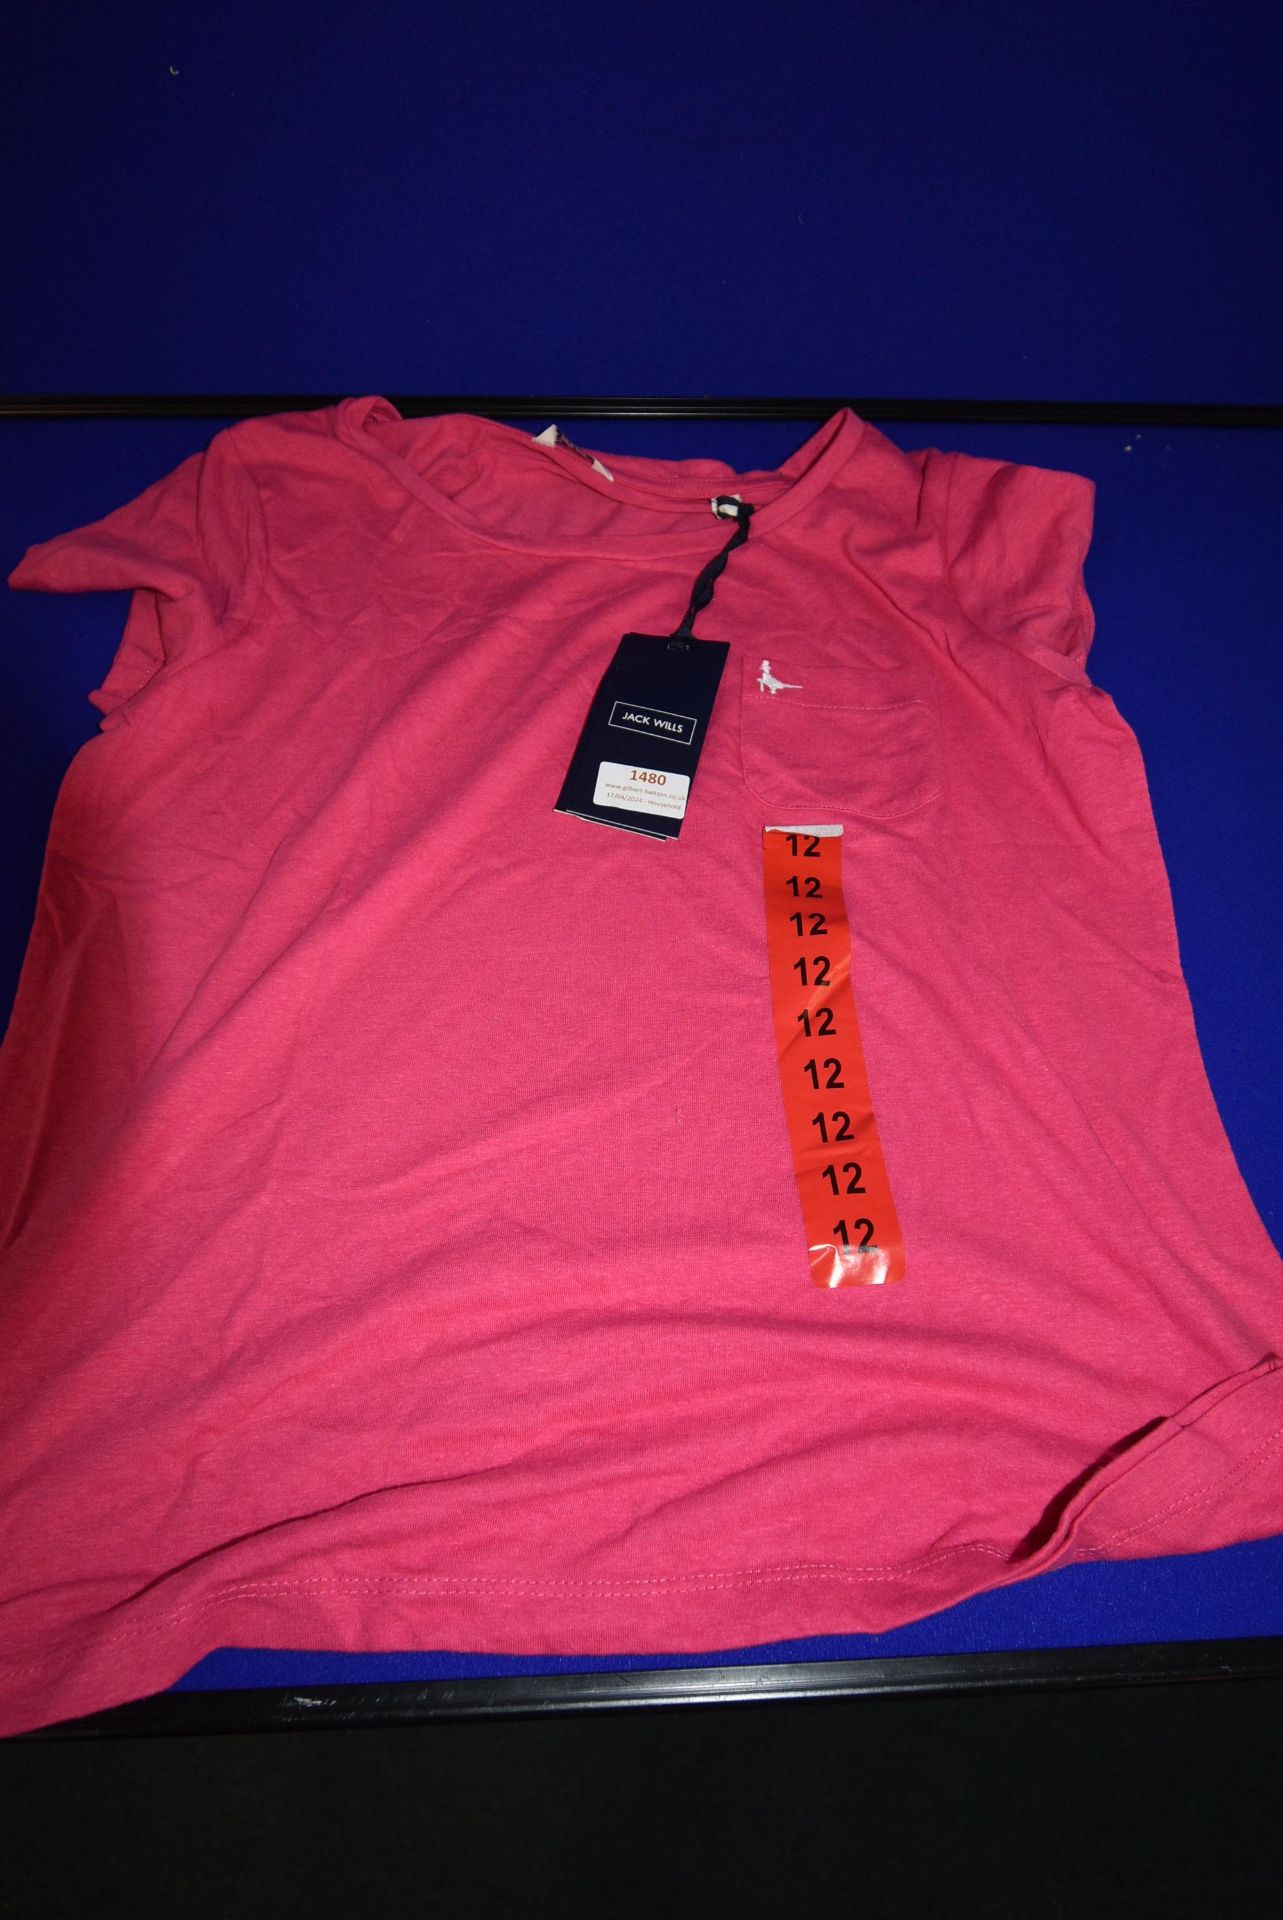 *Jack Wills Lady’s T-Shirt in Pink Size: 12